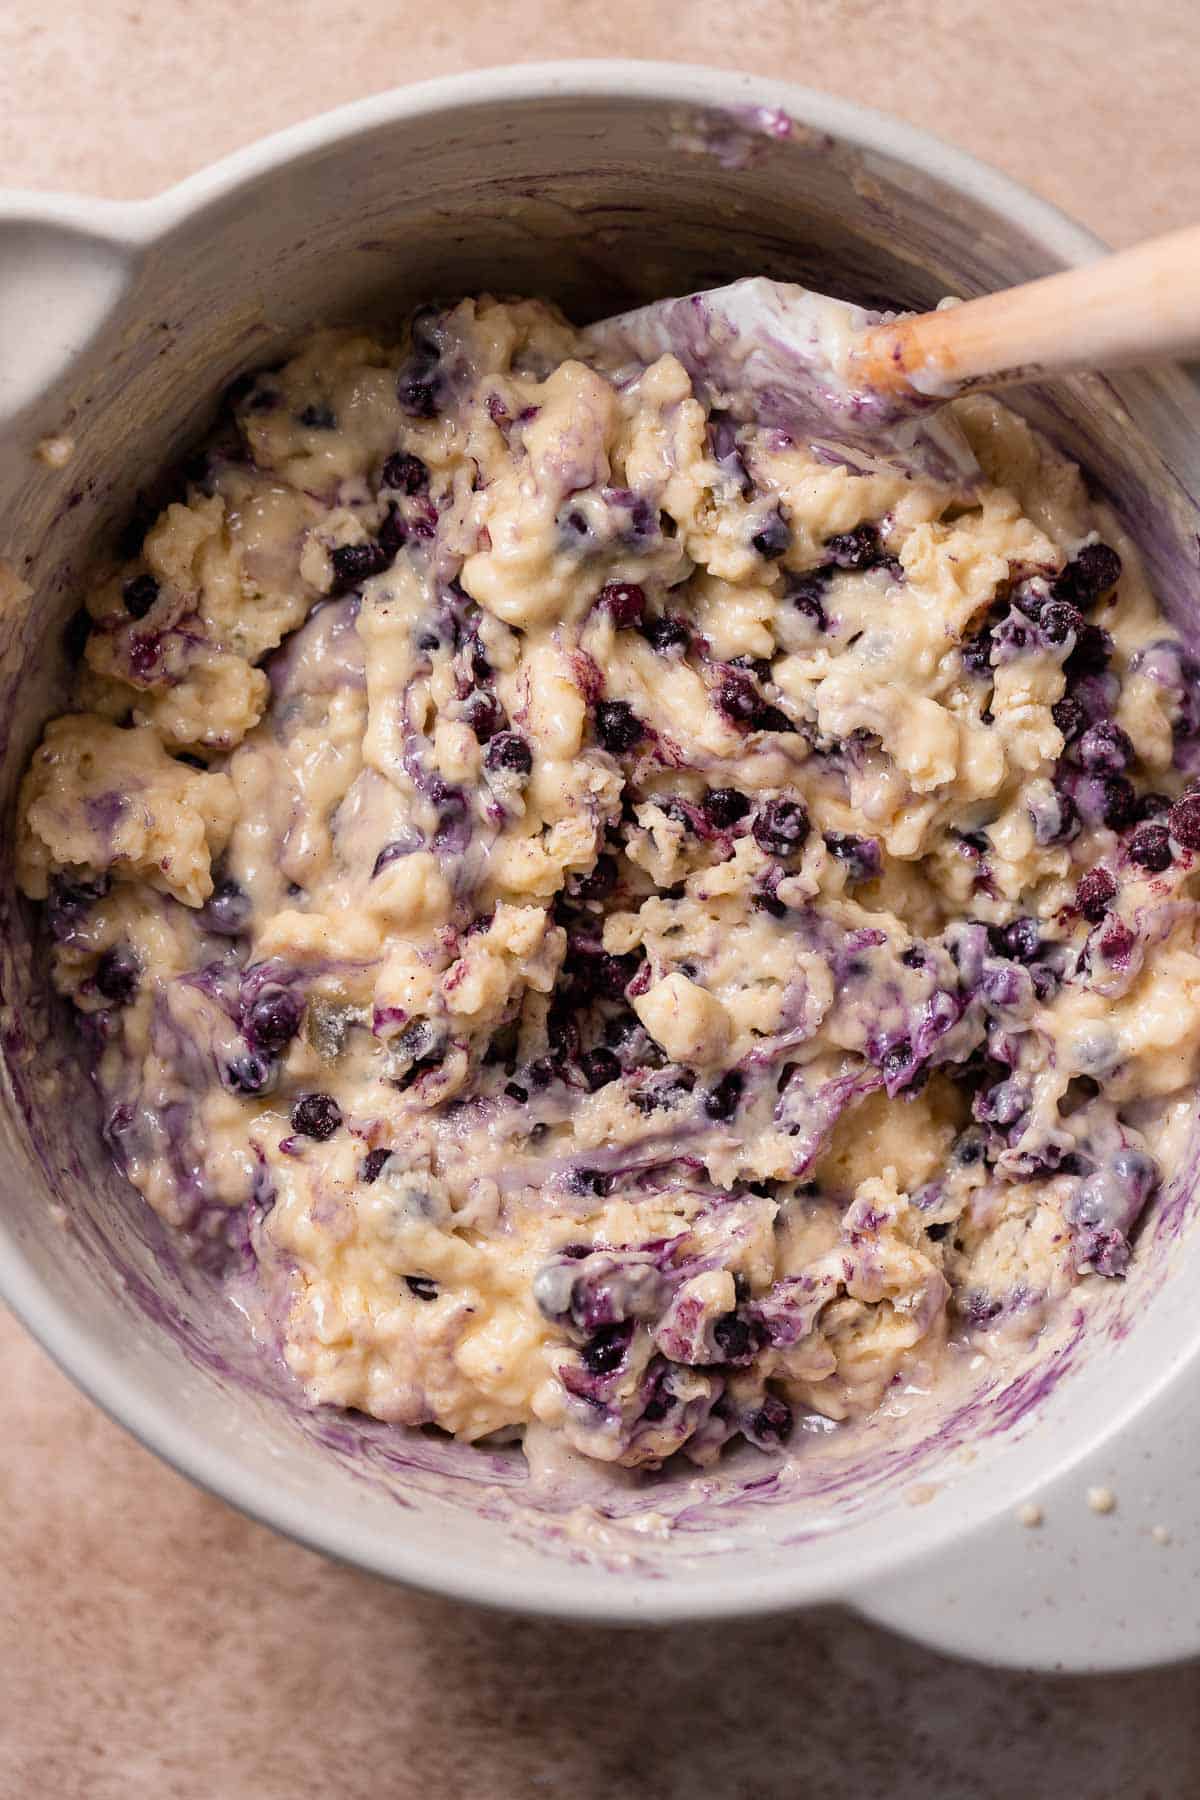 A mixing bowl with the blueberry muffin batter.